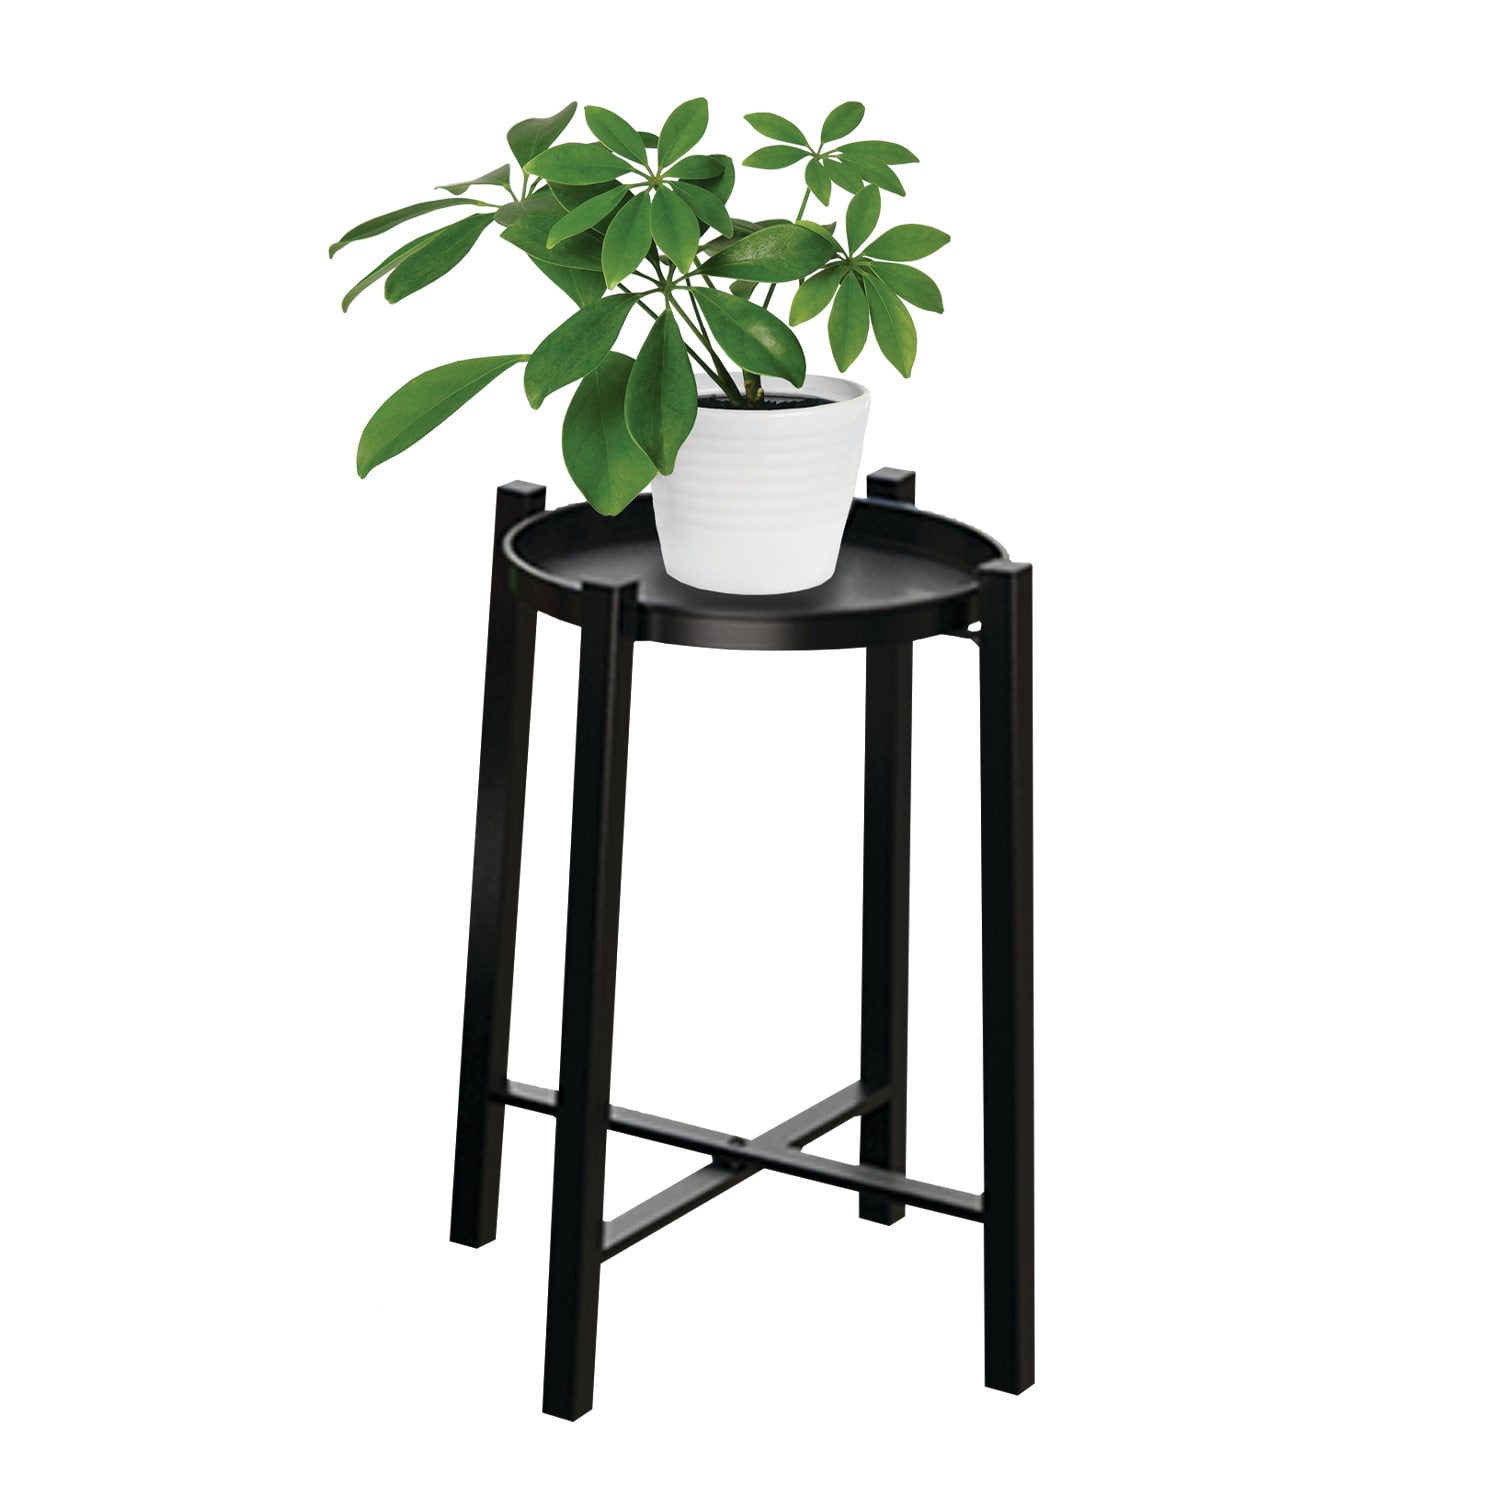 Modern 20.75-in H x 3.25-in W Black Indoor/Outdoor Round Steel Plant Stand | - Panacea Products 81007